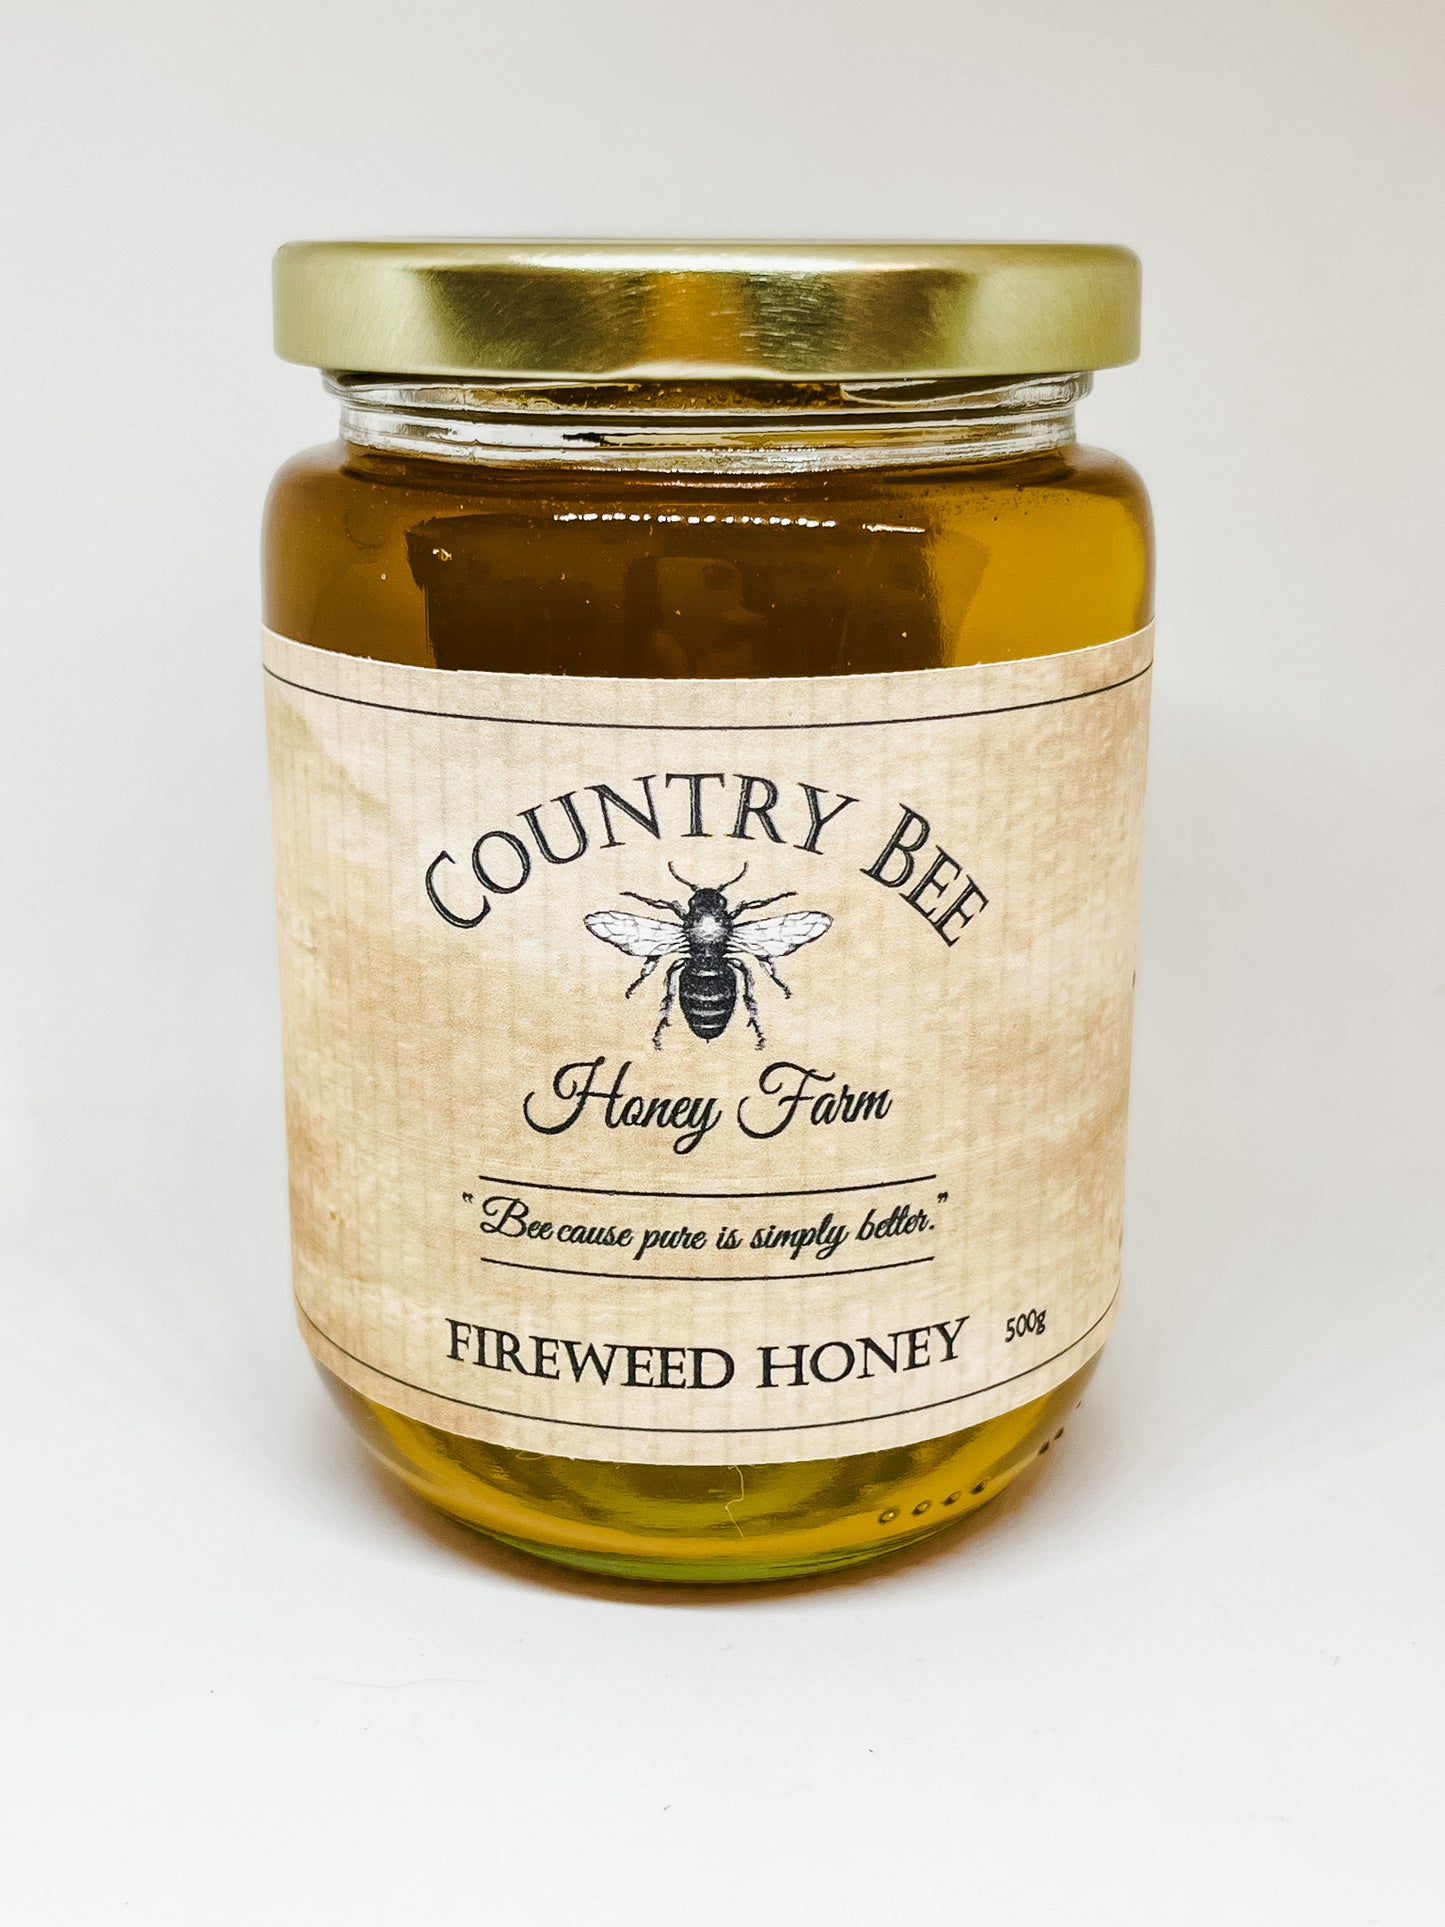 Fireweed Honey from Country Bee Honey Farm